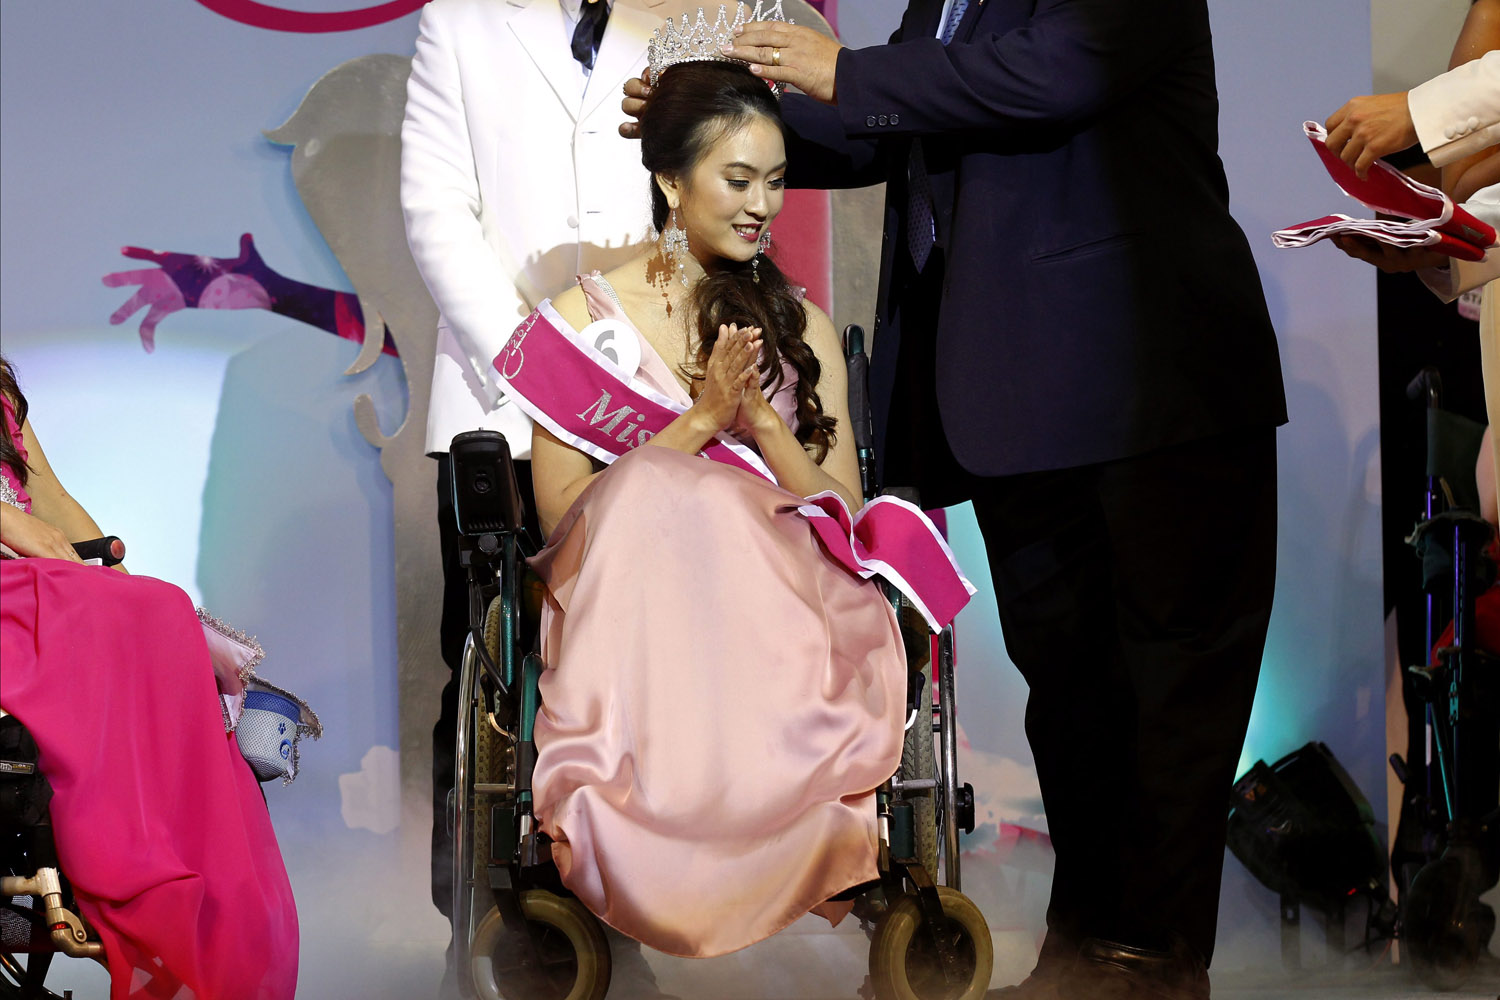 Aug. 22, 2012. Pattarawan Panitcha is crowned during the Miss Wheelchair Thailand 2012 contest in Bangkok.